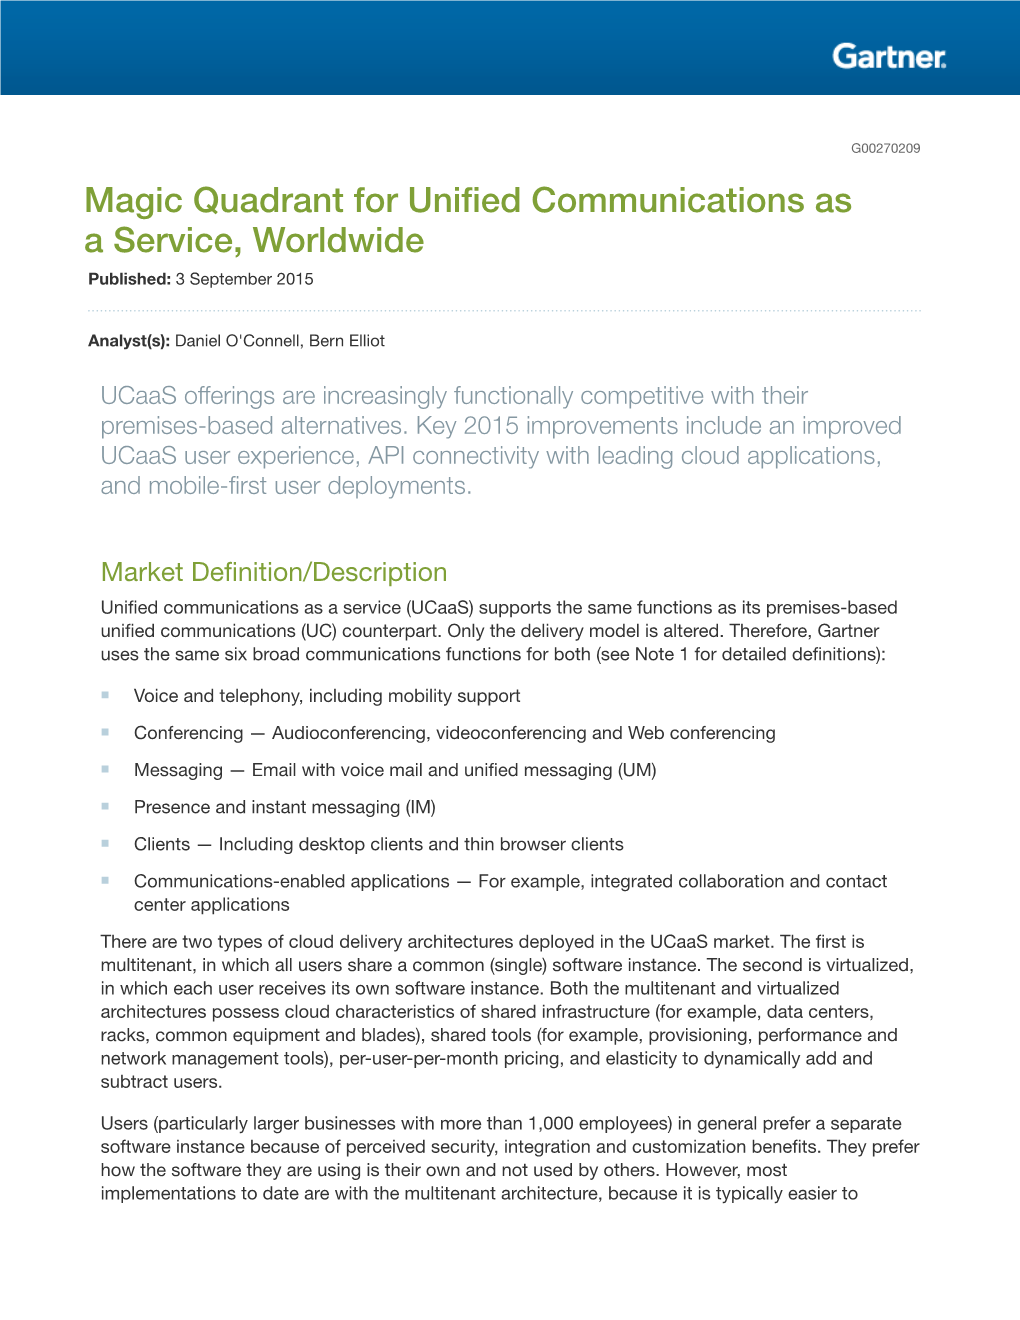 Magic Quadrant for Unified Communications As a Service, Worldwide Published: 3 September 2015